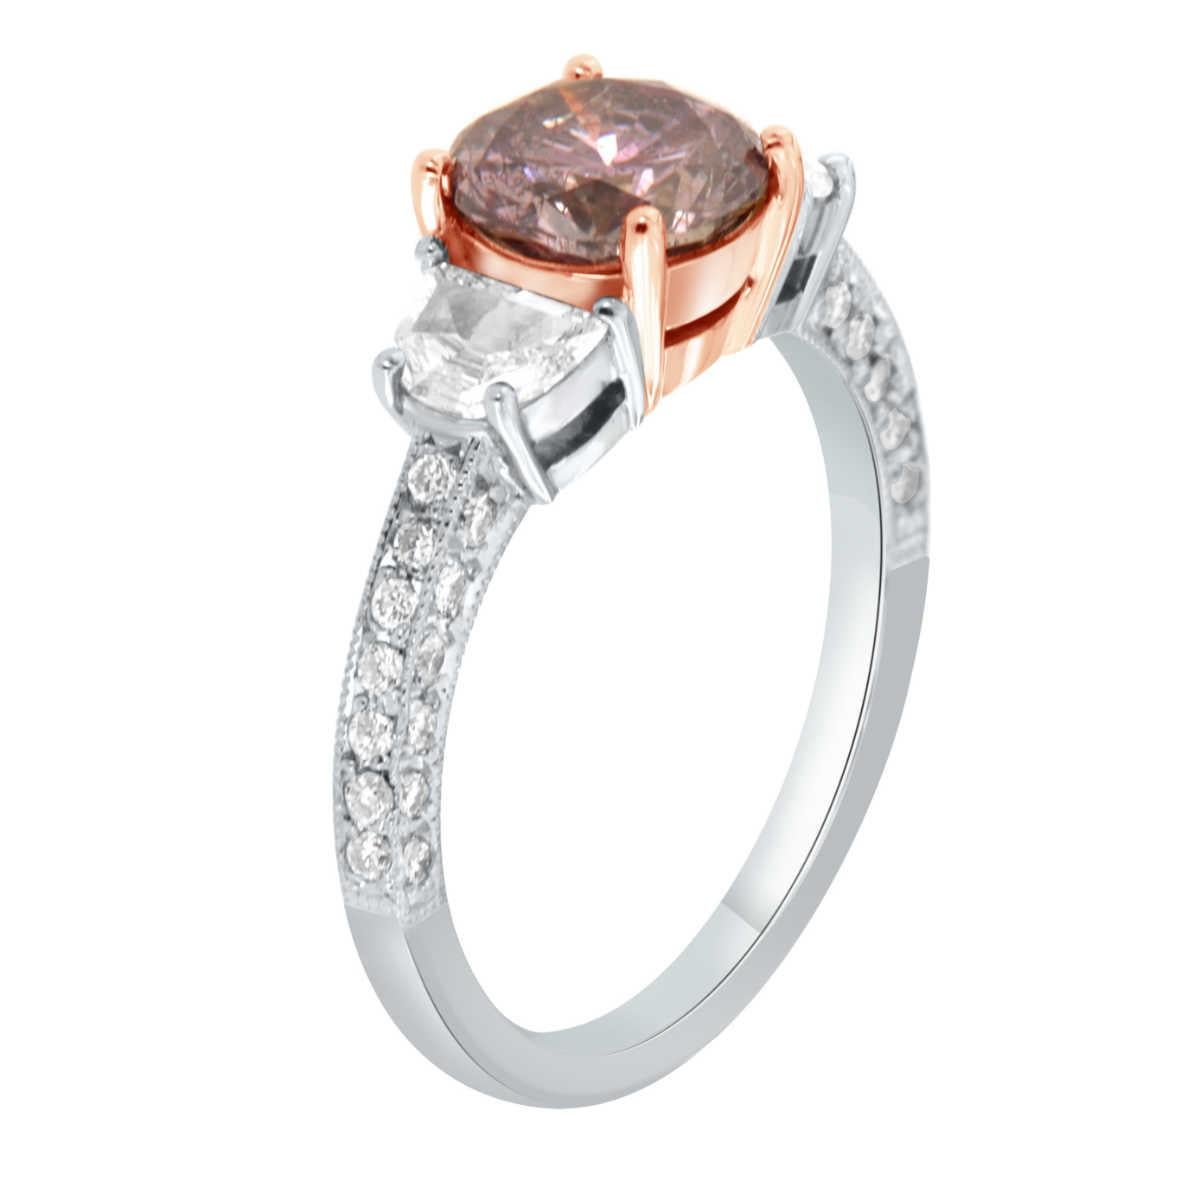 This 14K Two-Tone handcrafted Women's trilogy ring showcases a  Rare 1.55 Carat GIA Certified Natural Vibrant Fancy Brownish Pinkish-Purple Round Brilliant Cut diamond accompanied by two (2) Half. Moon Cut diamonds on each side, along with a melee